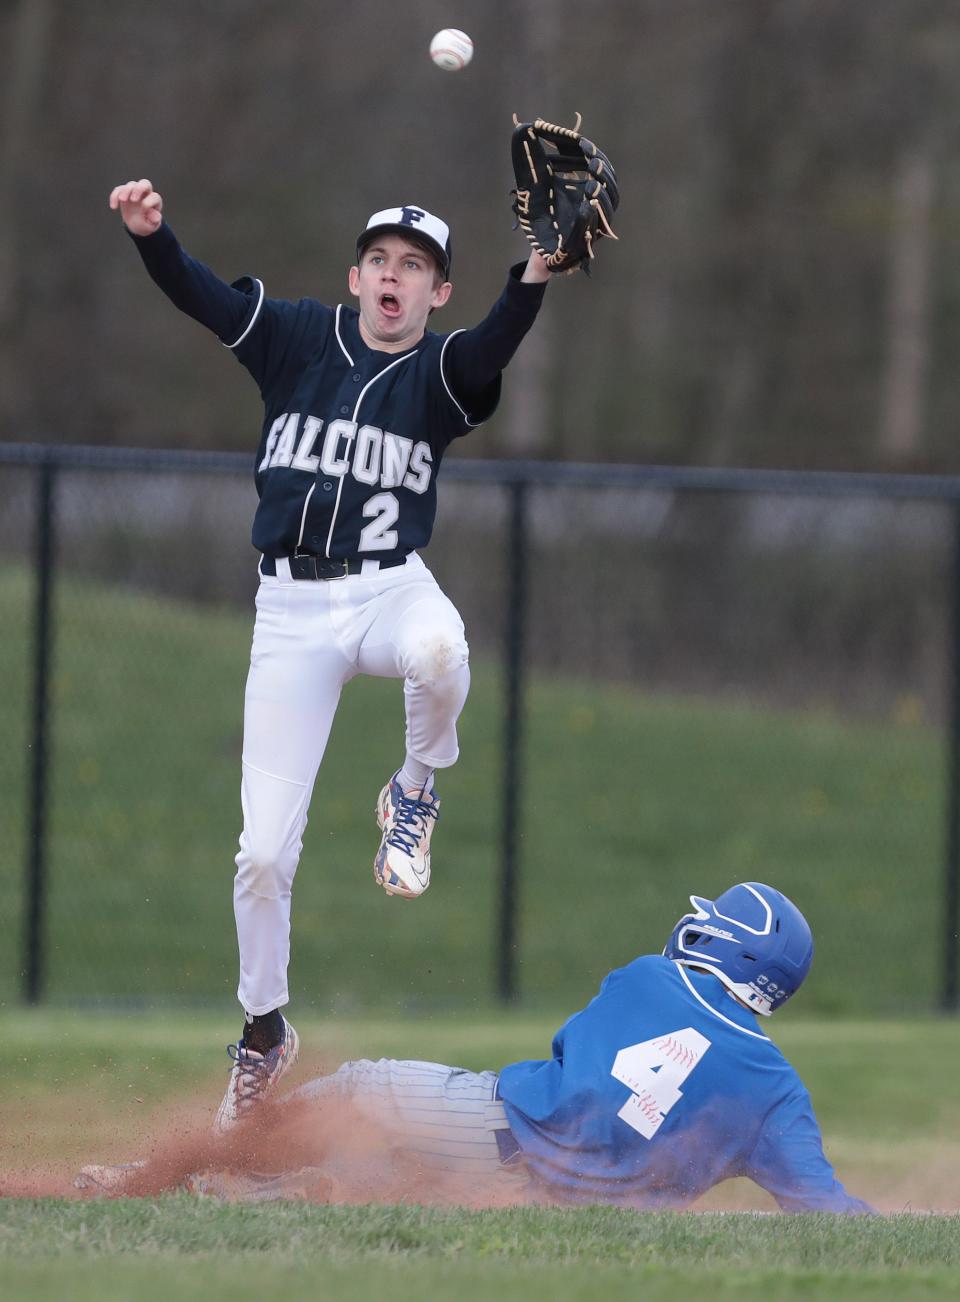 Tuslaw's Tyler Simmons slides safely into second ahead of a throw to Fairless' Brent Hrynko during Wednesday's game.